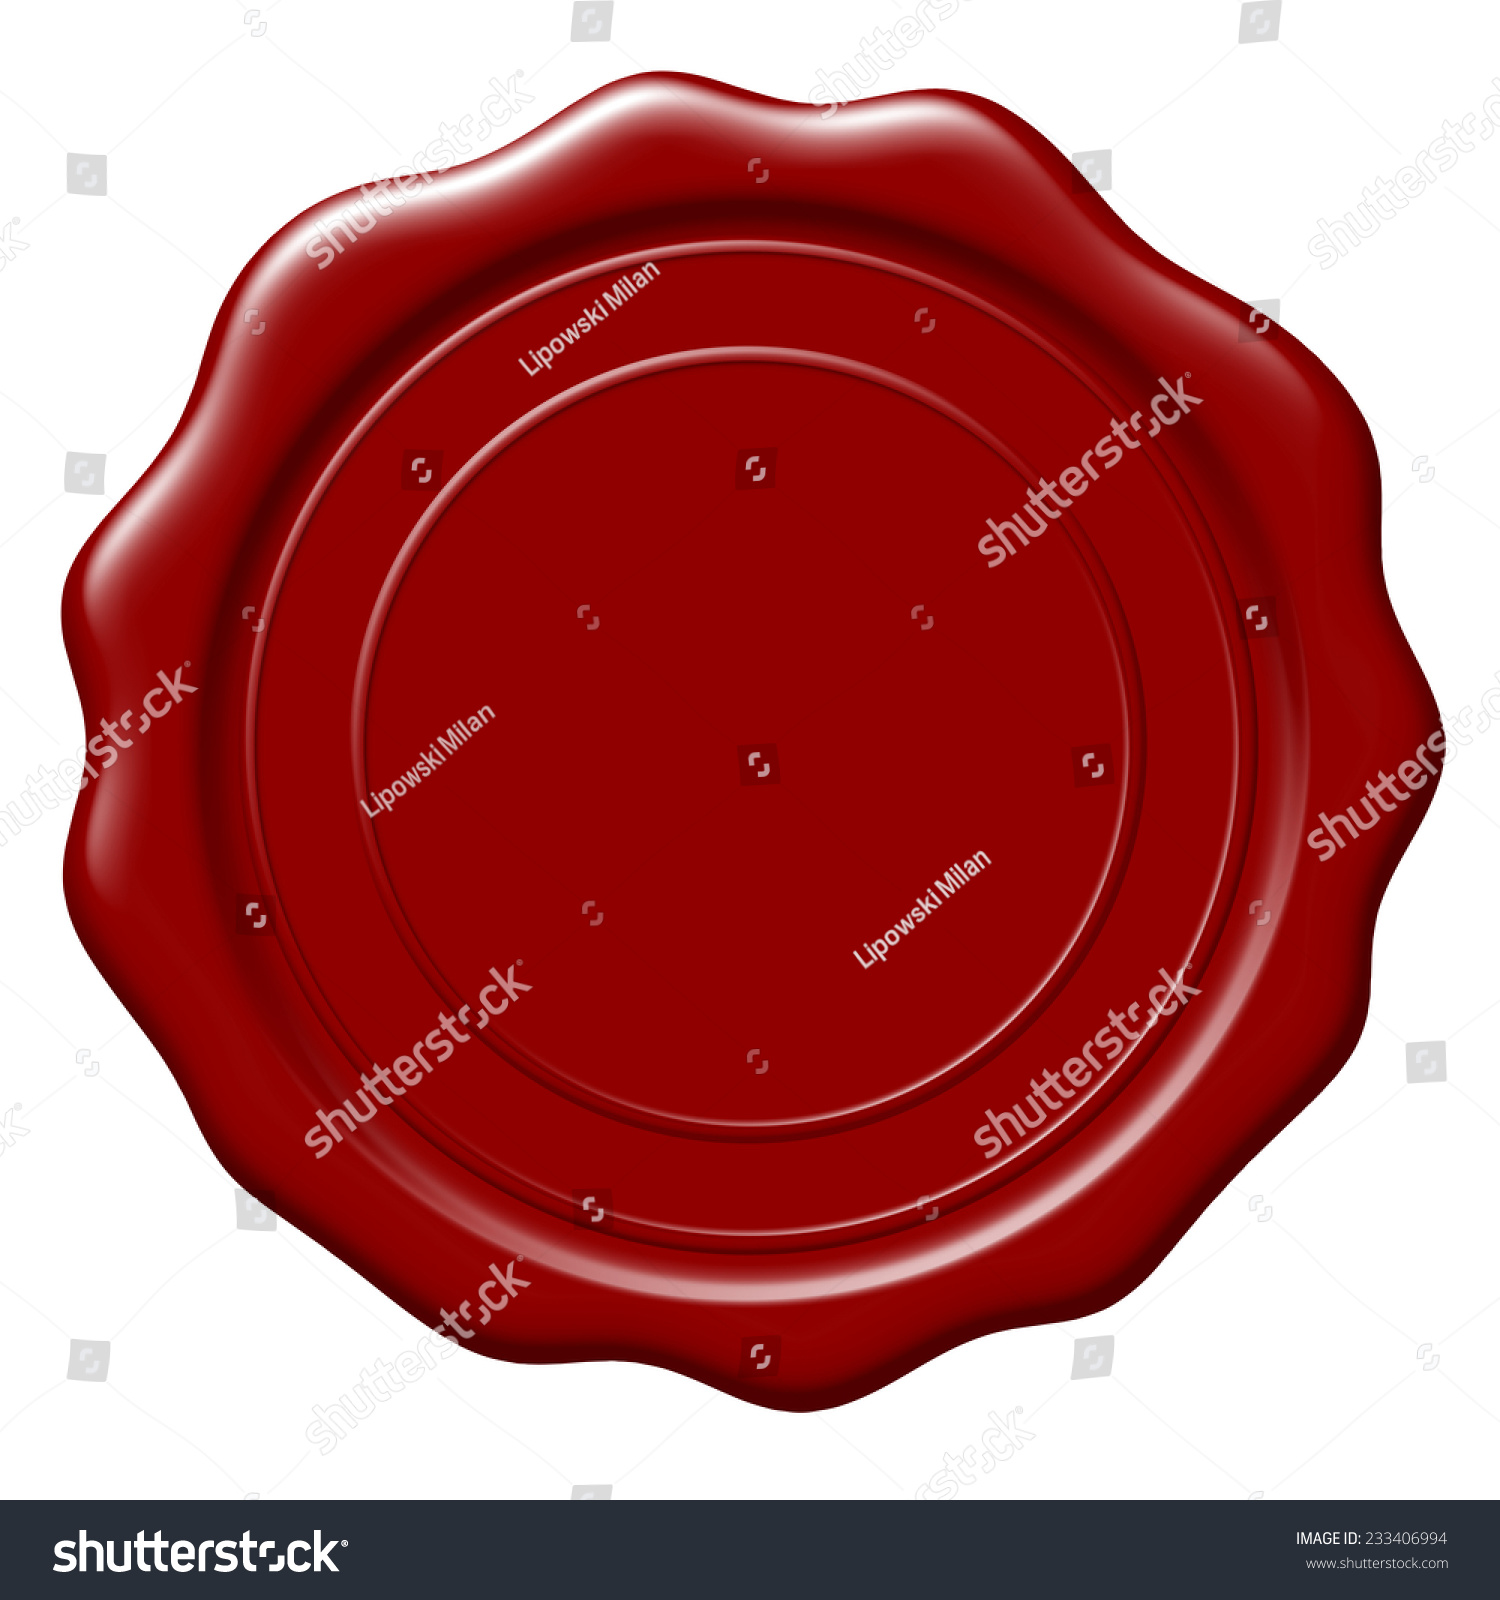 Illustration Of Blank Wax Seal On White Background - 233406994 ...